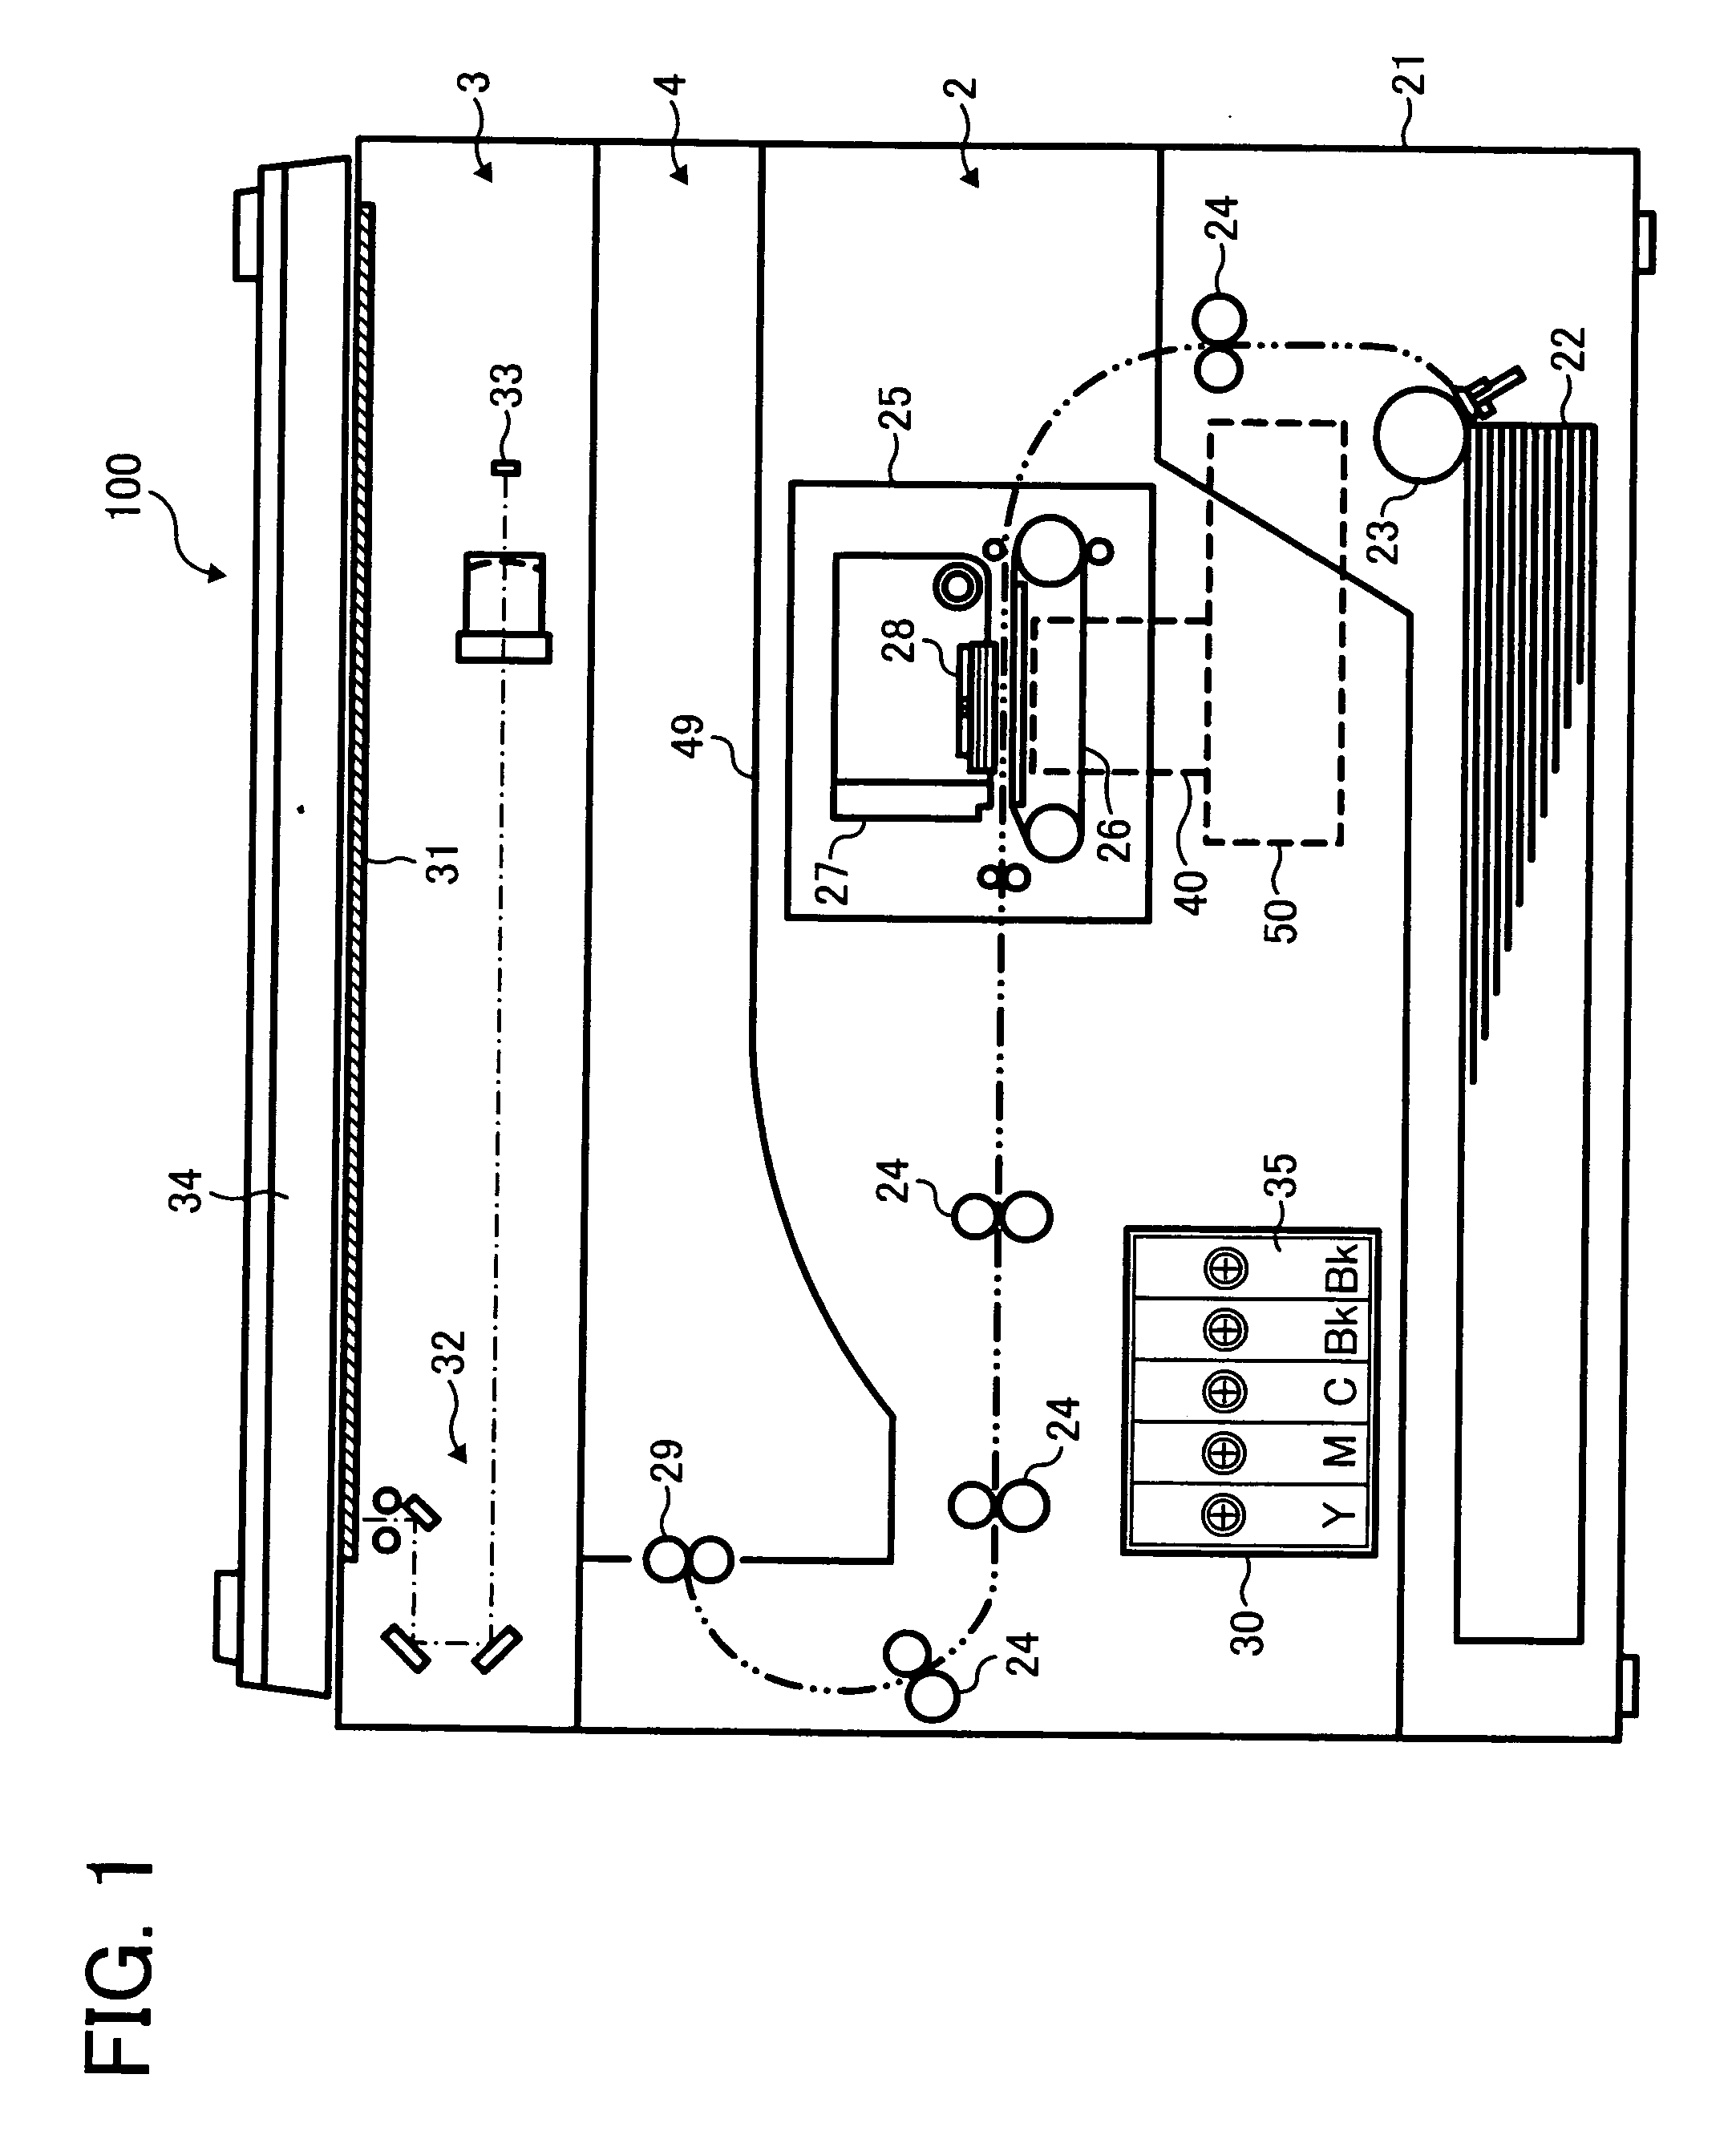 Ink jet recording apparatus with higher flexibility in layout of components